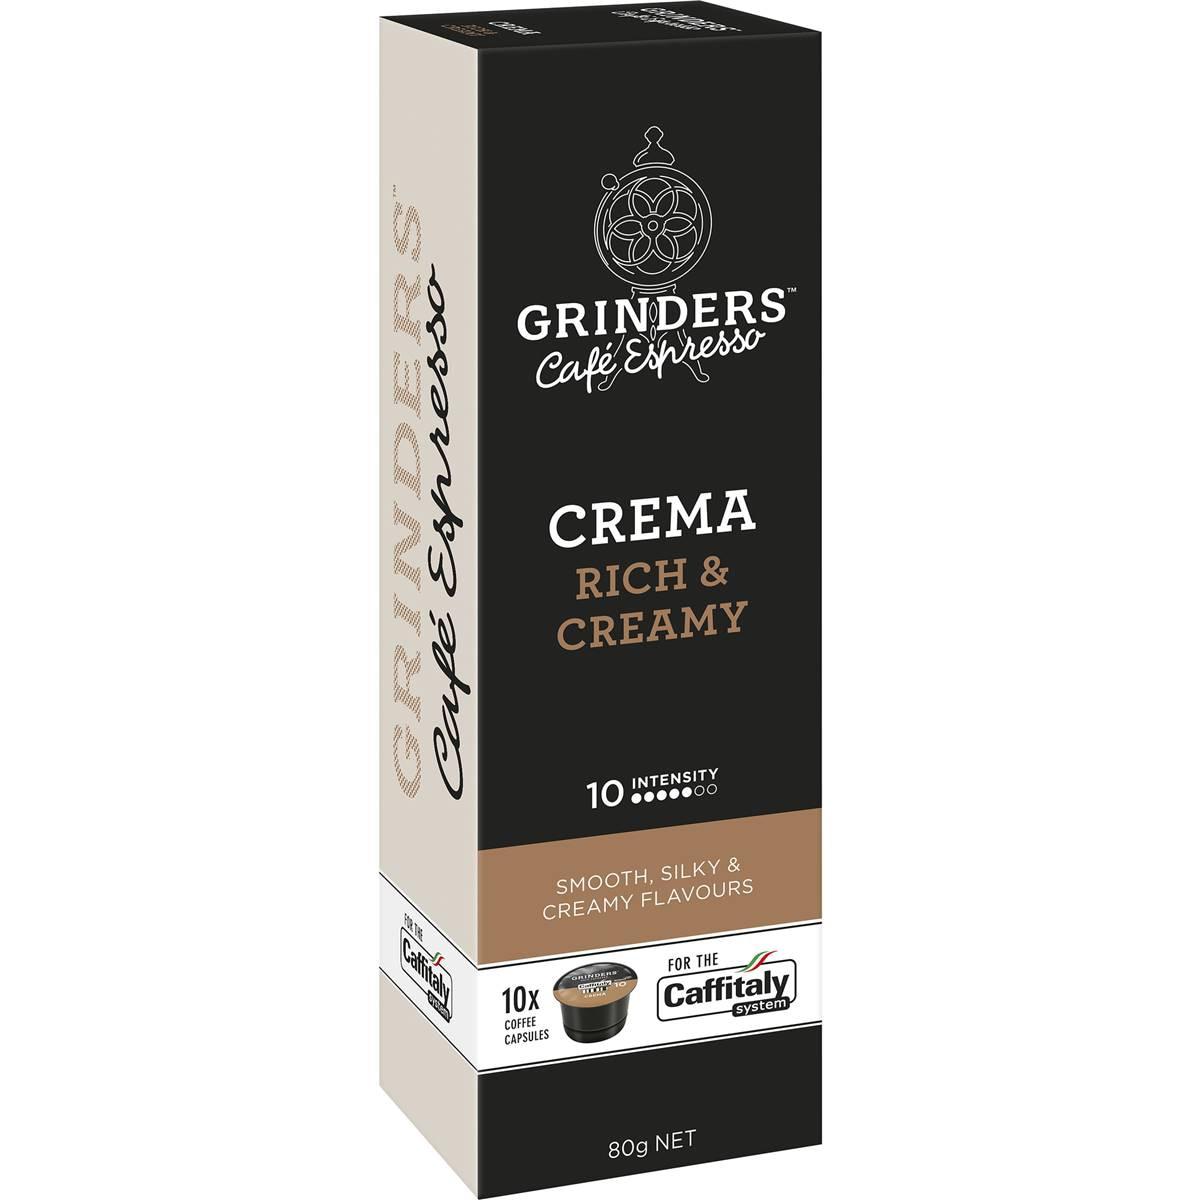 Grinders Coffee Capsules Crema Caffitaly System 10 Pack